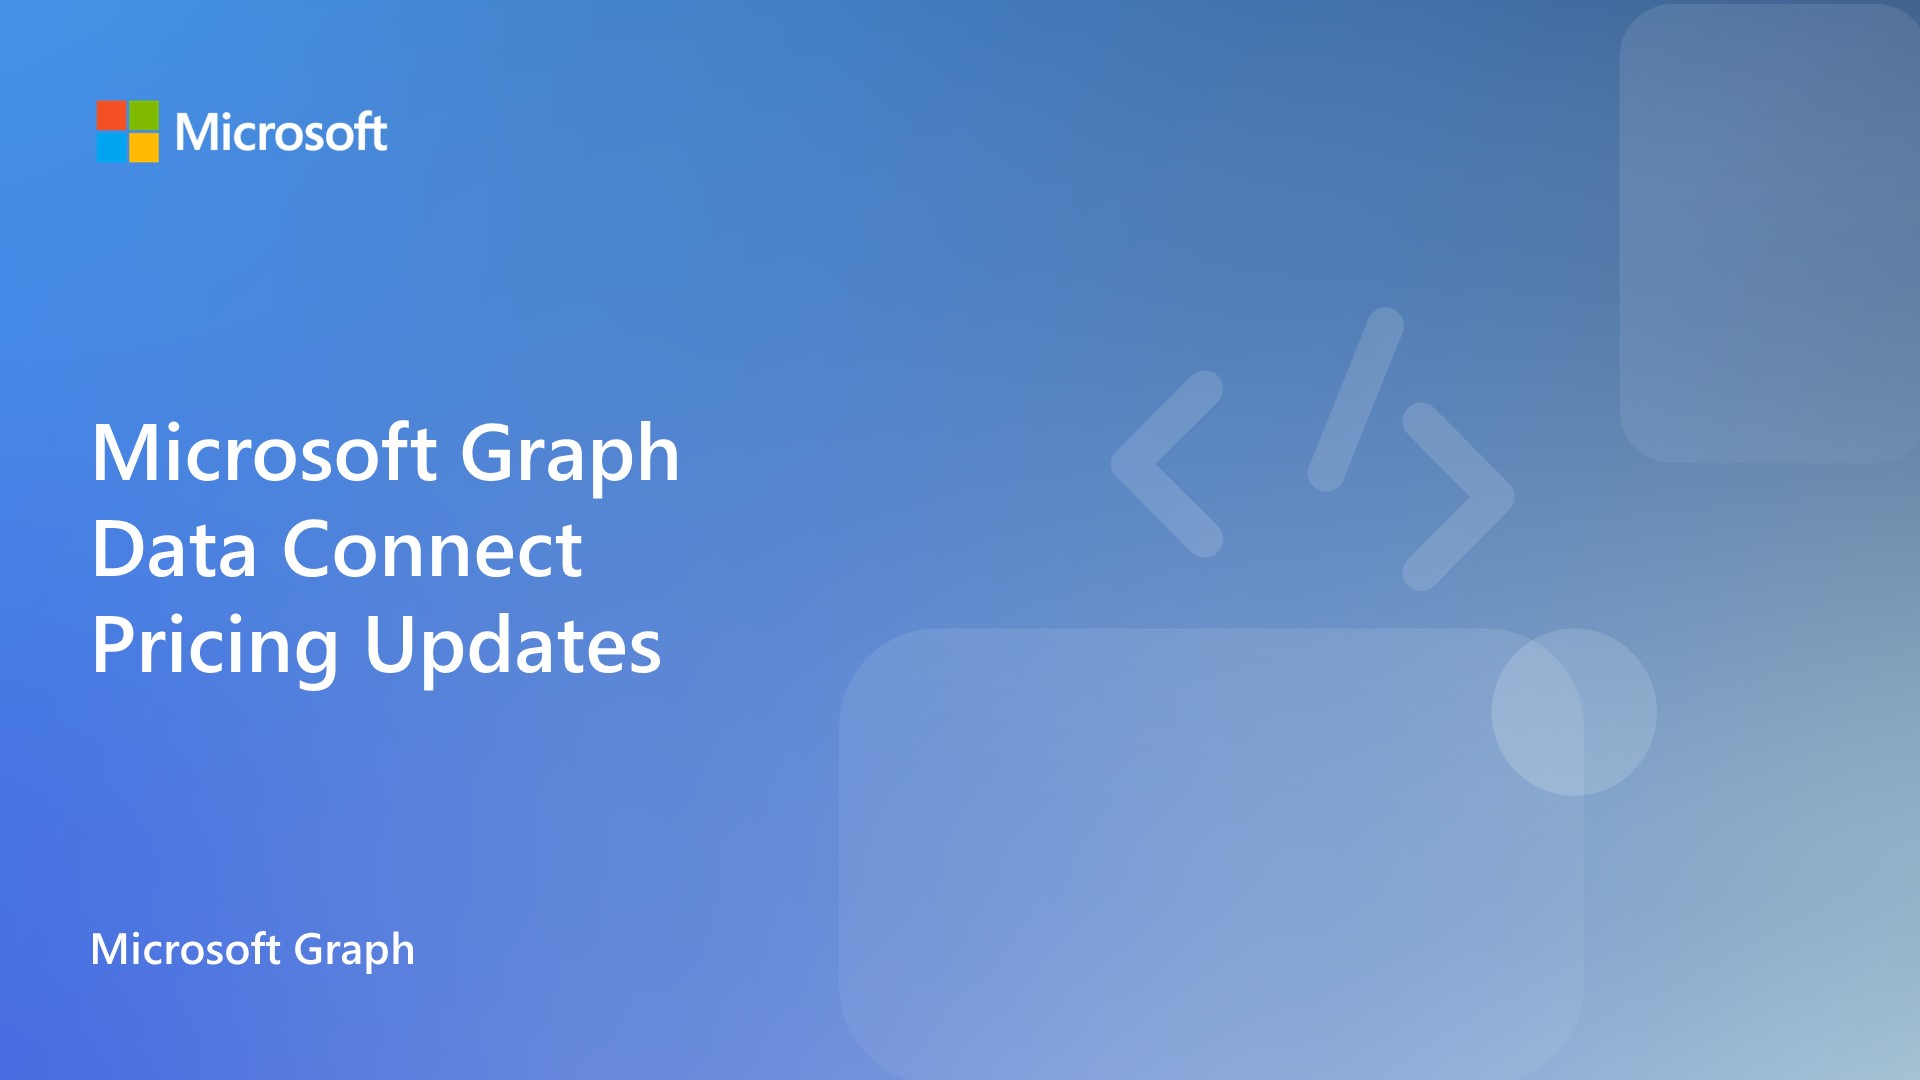 Microsoft Graph Data Connect pricing updates 